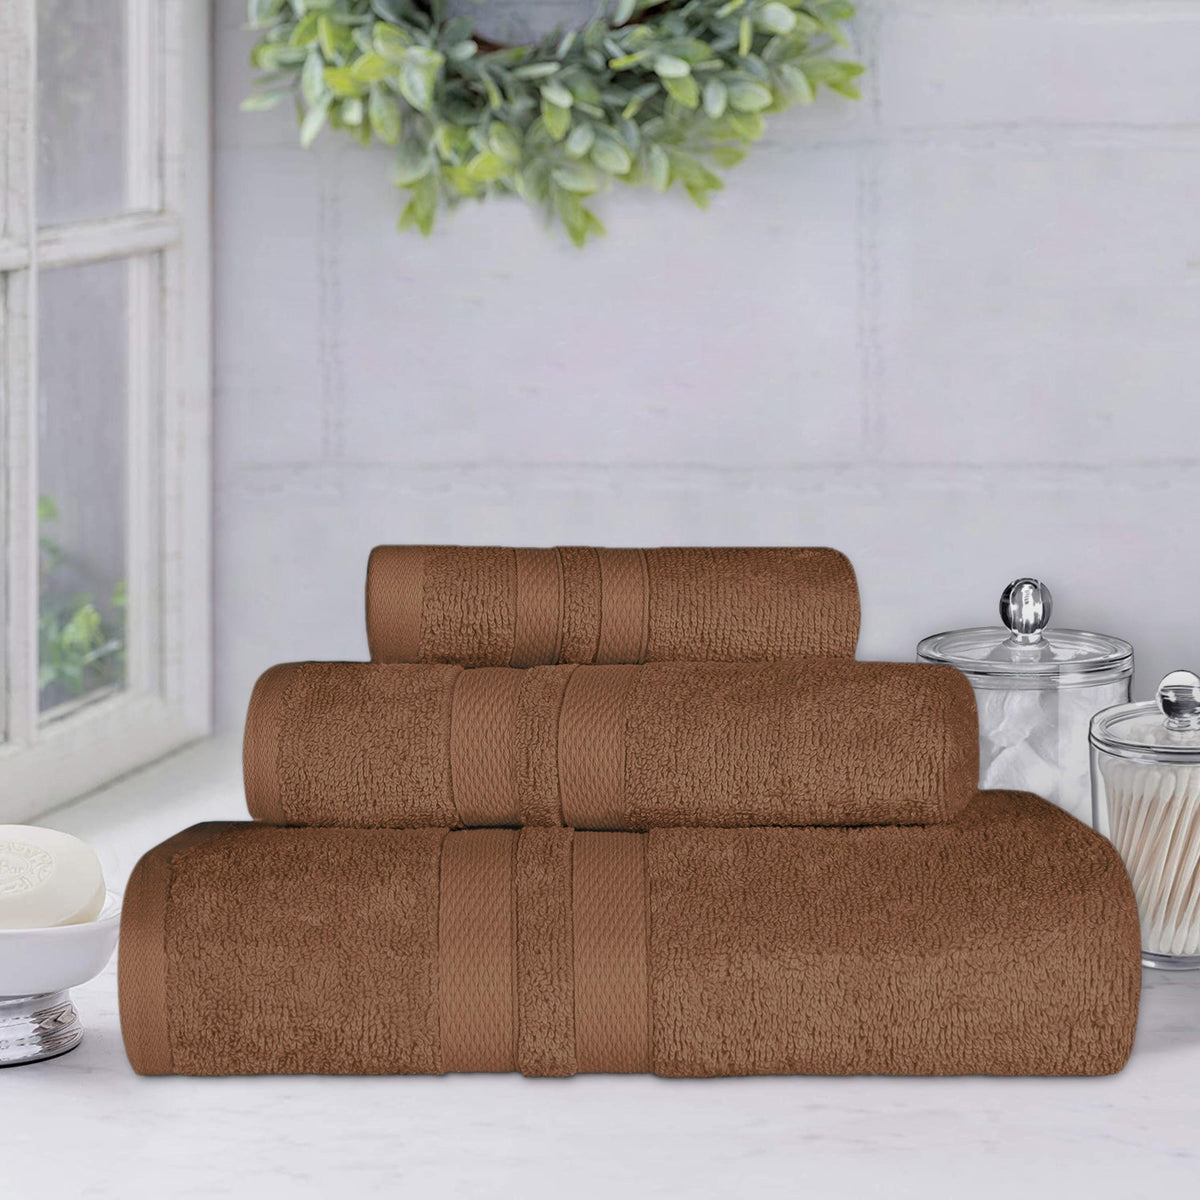 Superior Ultra Soft Cotton Absorbent Solid Assorted 3-Piece Towel Set - Chocolate